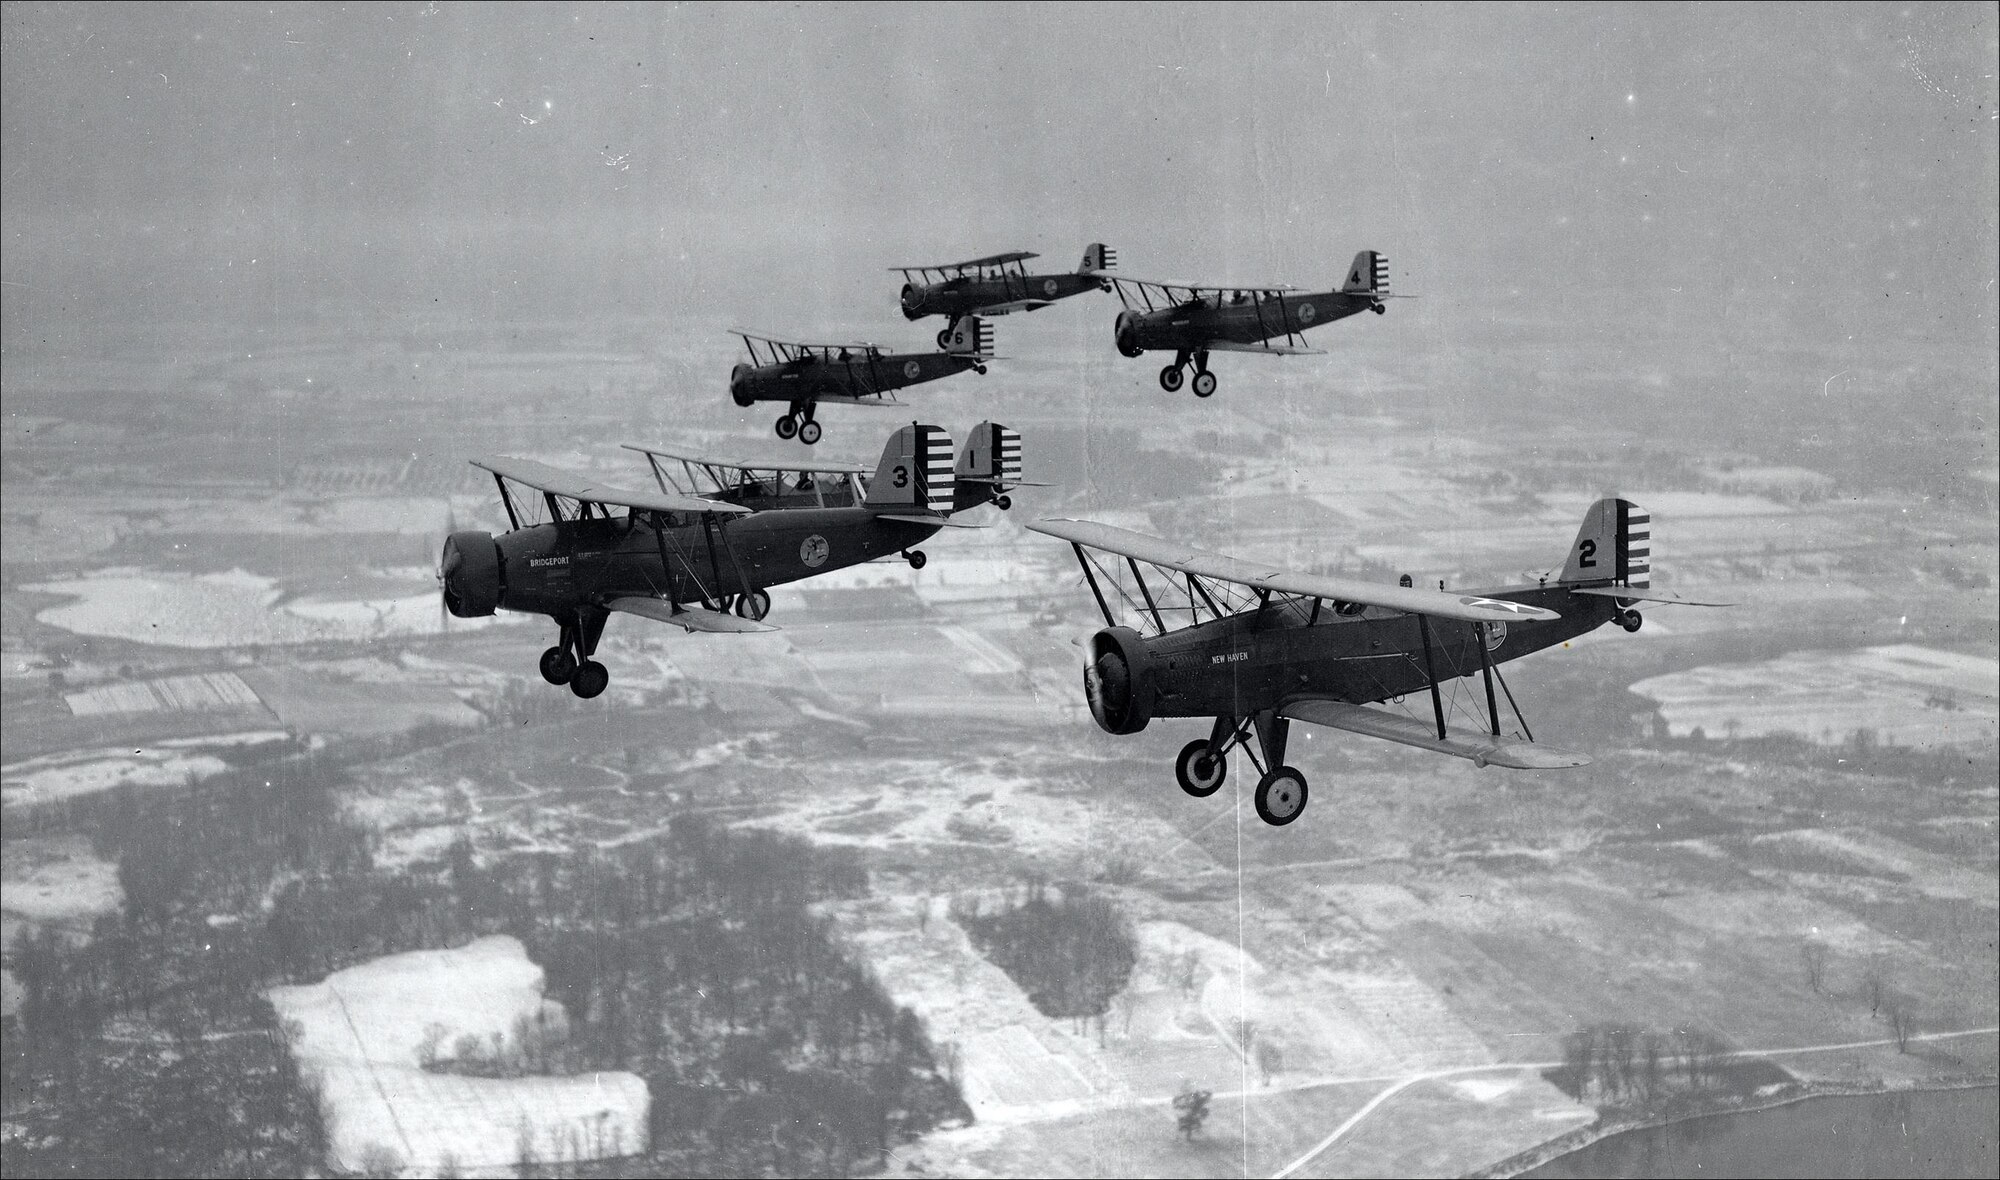 A formation of Douglas 0-38 aircraft emblazoned with the Flying Yankees insignia operated by aviators from the 118th Observation Squadron. The squadron flew the O-38 between 1931—1937. (U.S. Air National Guard file photo)